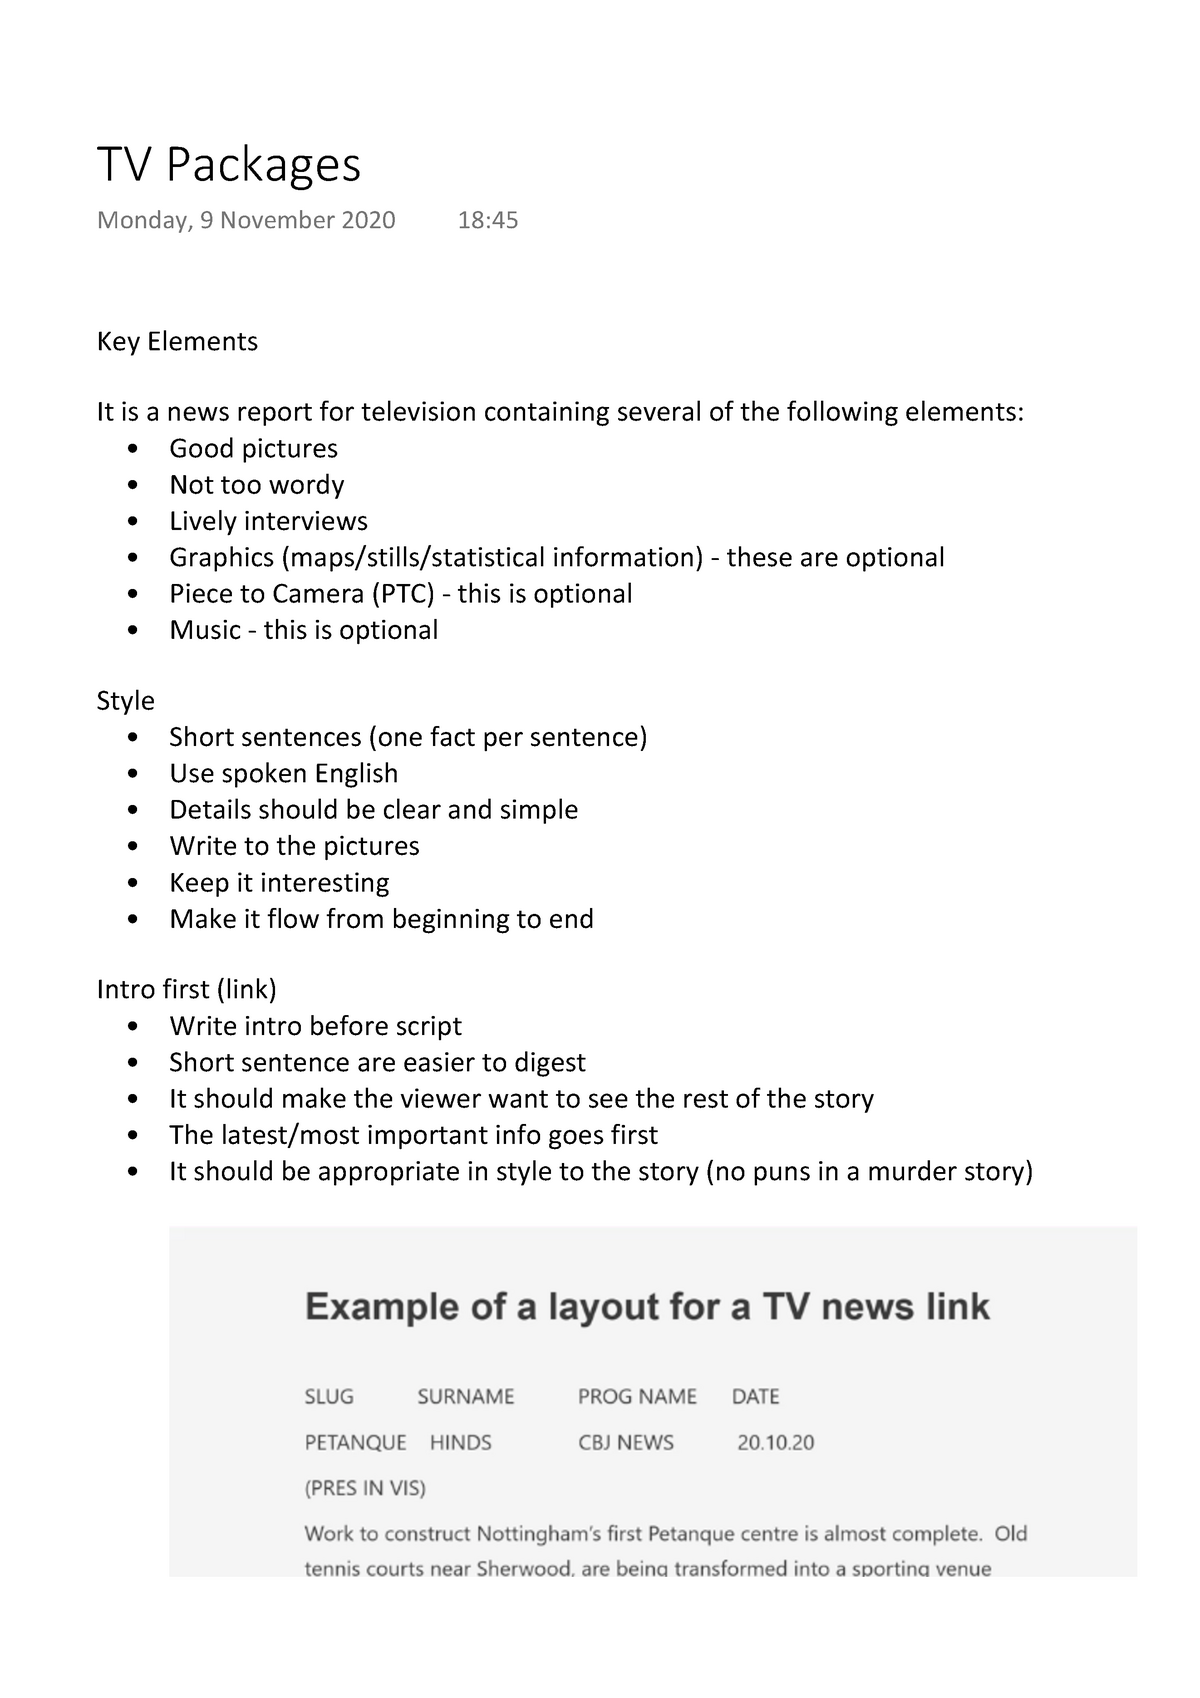 TV Packages - Lecture notes xx - Broadcast News Skills - JOUR13